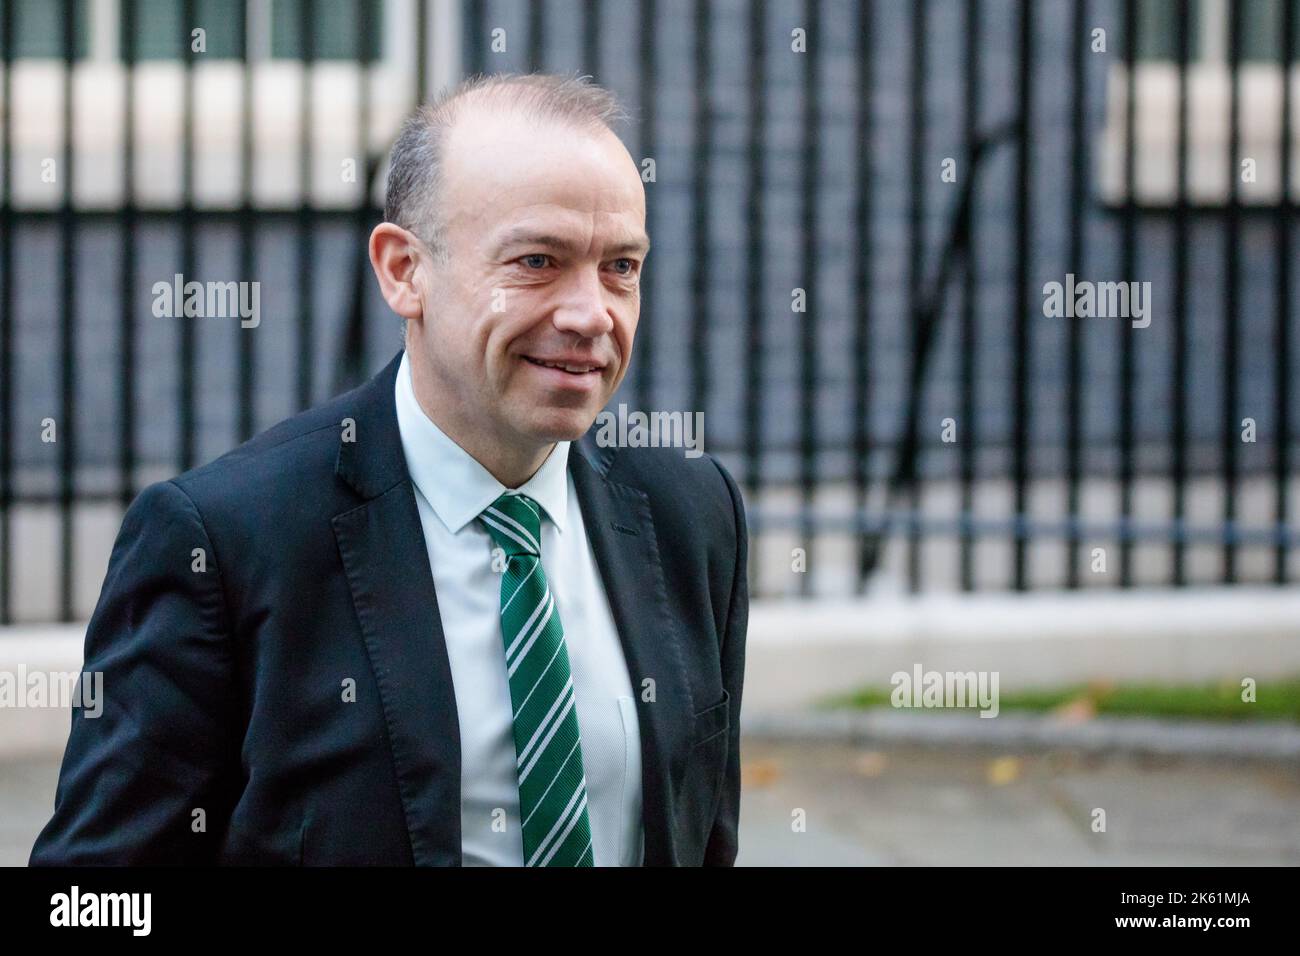 Downing Street, London, UK. 11th October 2022. Ministers attend the first Cabinet Meeting at 10 Downing Street since the Conservative Party Conference last week. Chris Heaton-Harris MP, Secretary of State for Northern Ireland. Amanda Rose/Alamy Live News Stock Photo